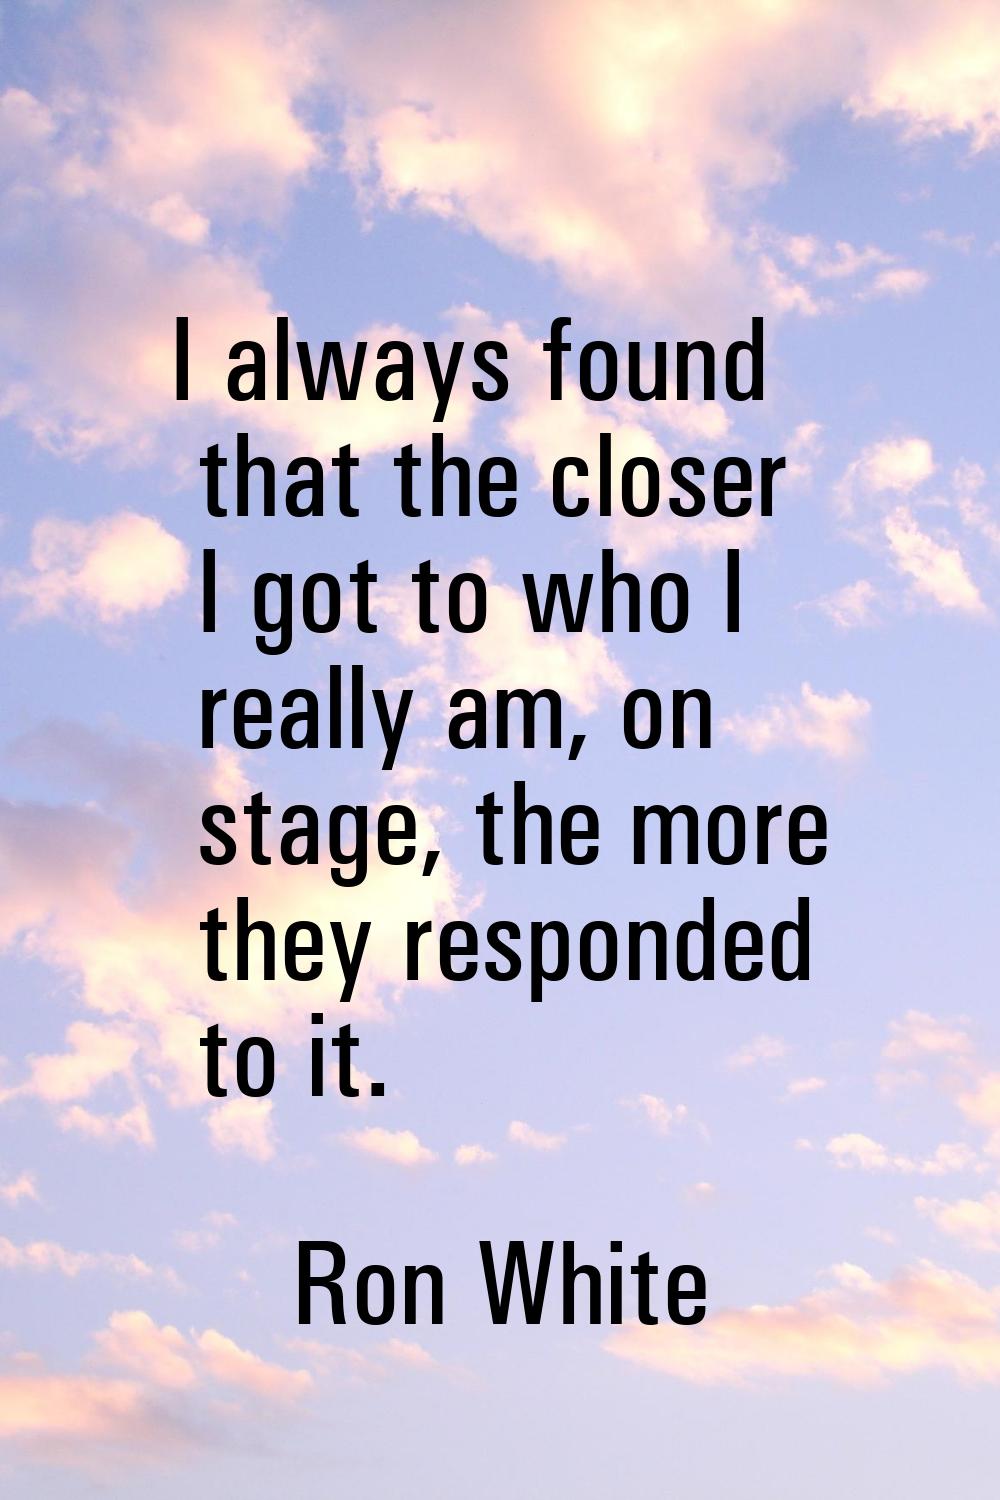 I always found that the closer I got to who I really am, on stage, the more they responded to it.